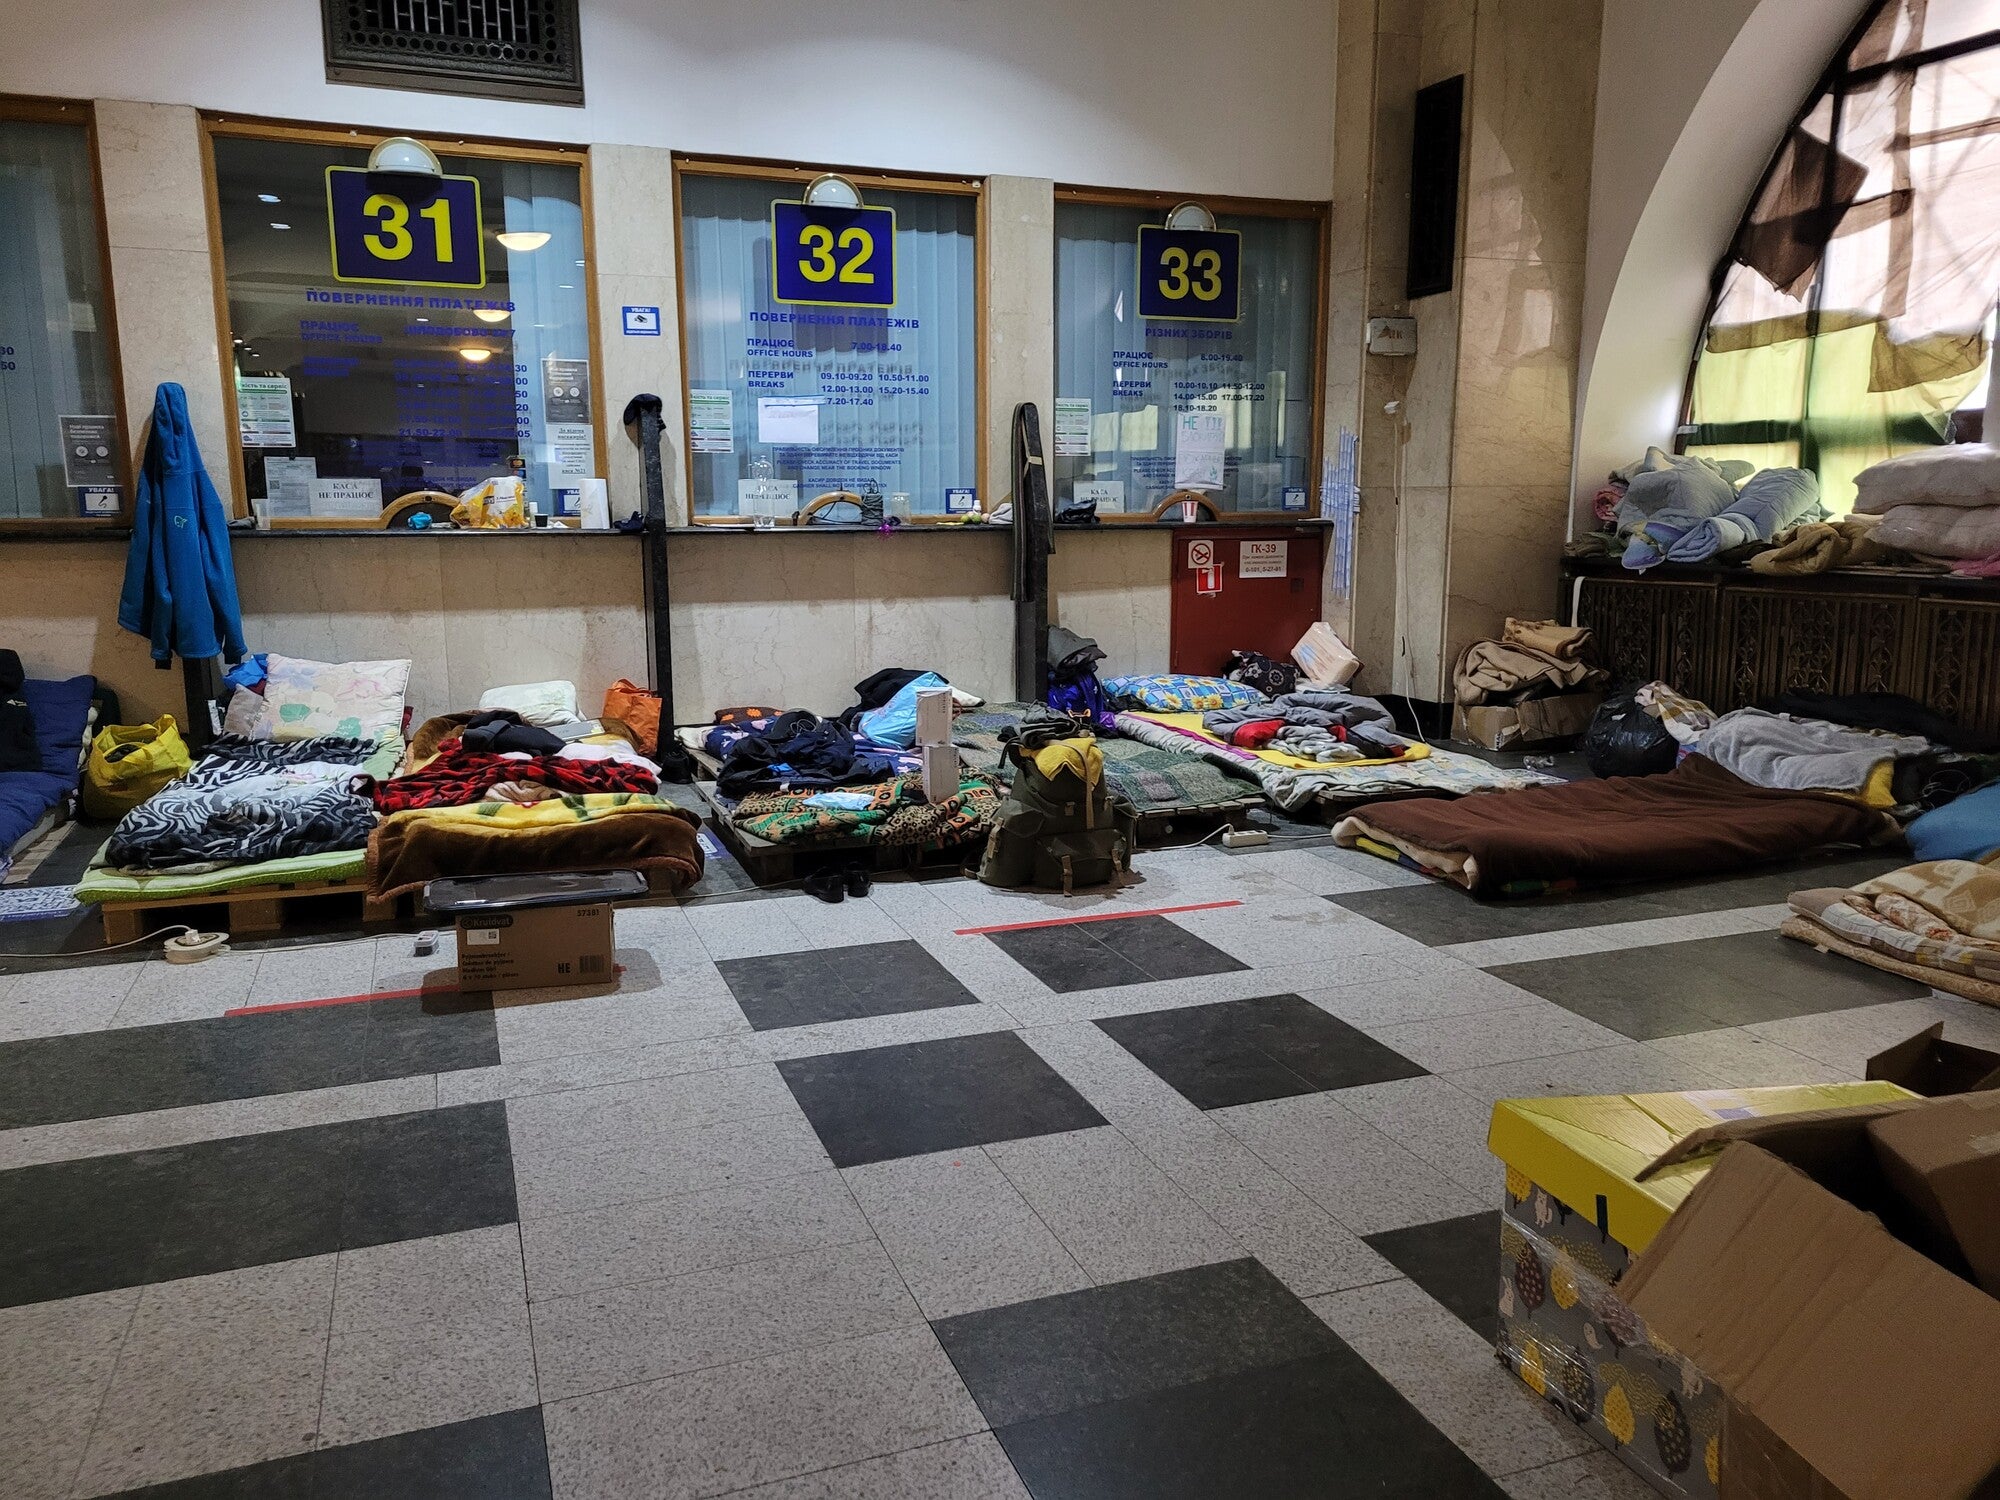 Makeshift beds inside the ticketing area of a train station.